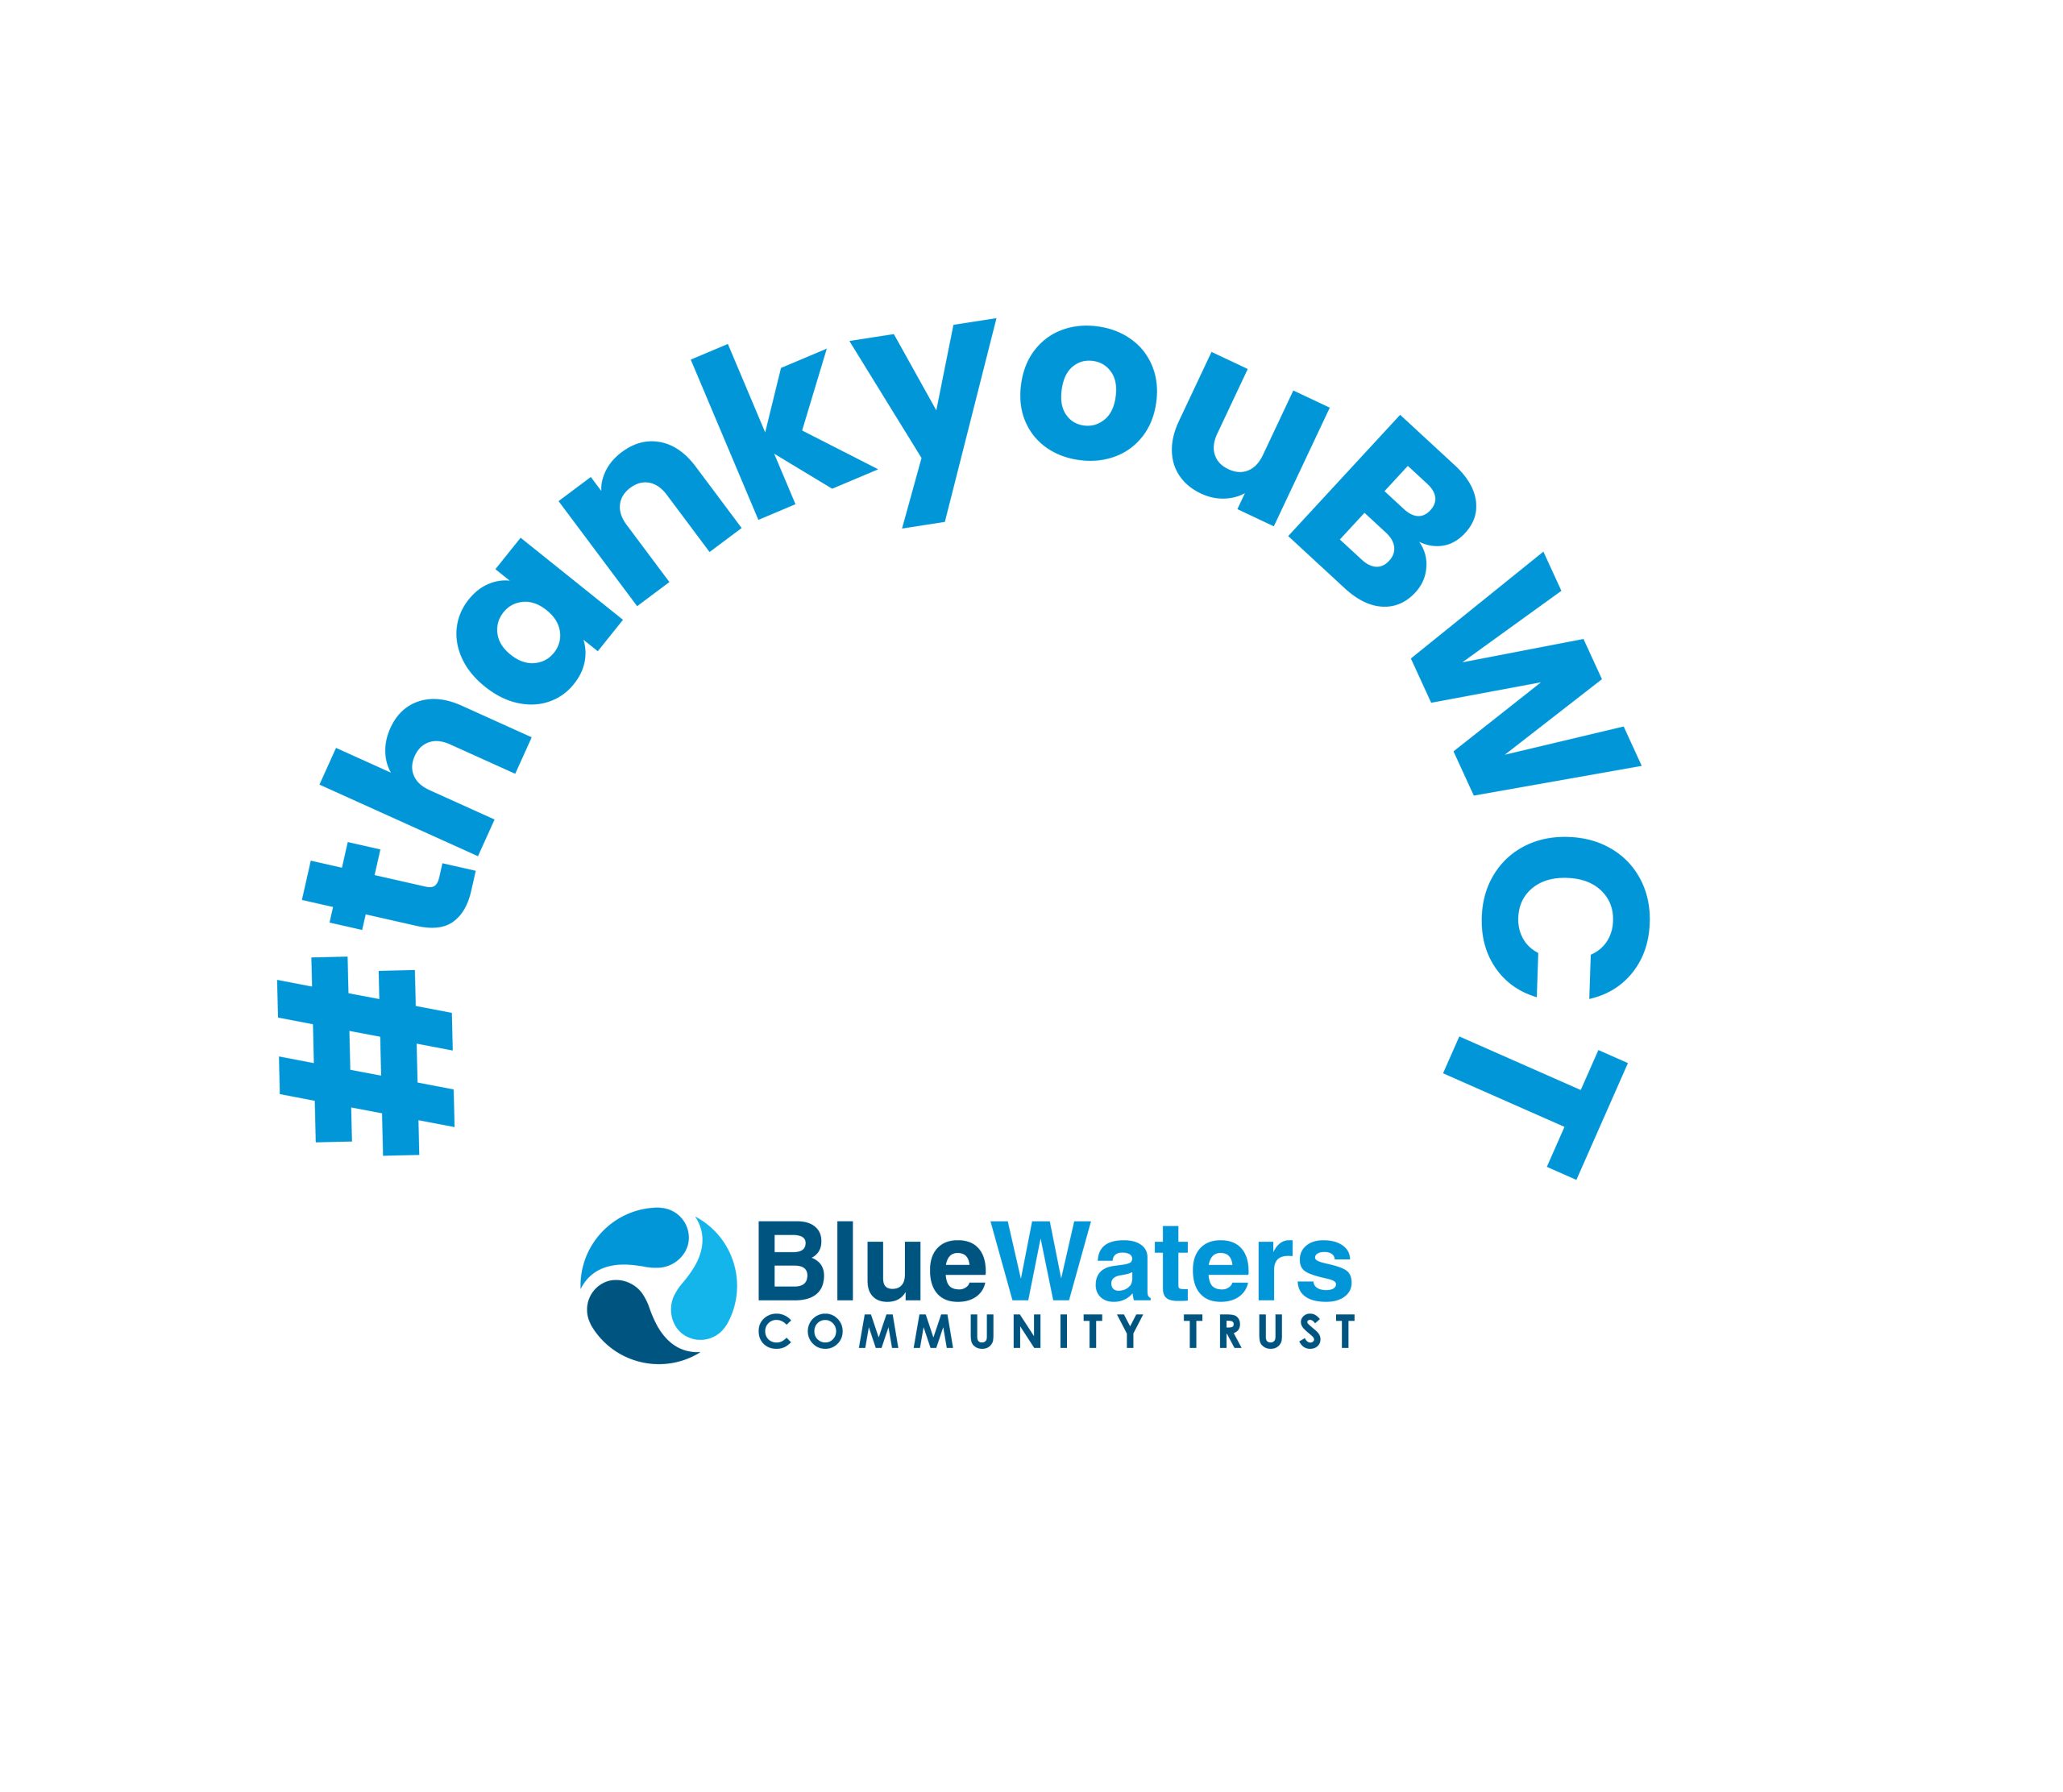 Featured Image for “Thank you Blue Waters Community Trust”